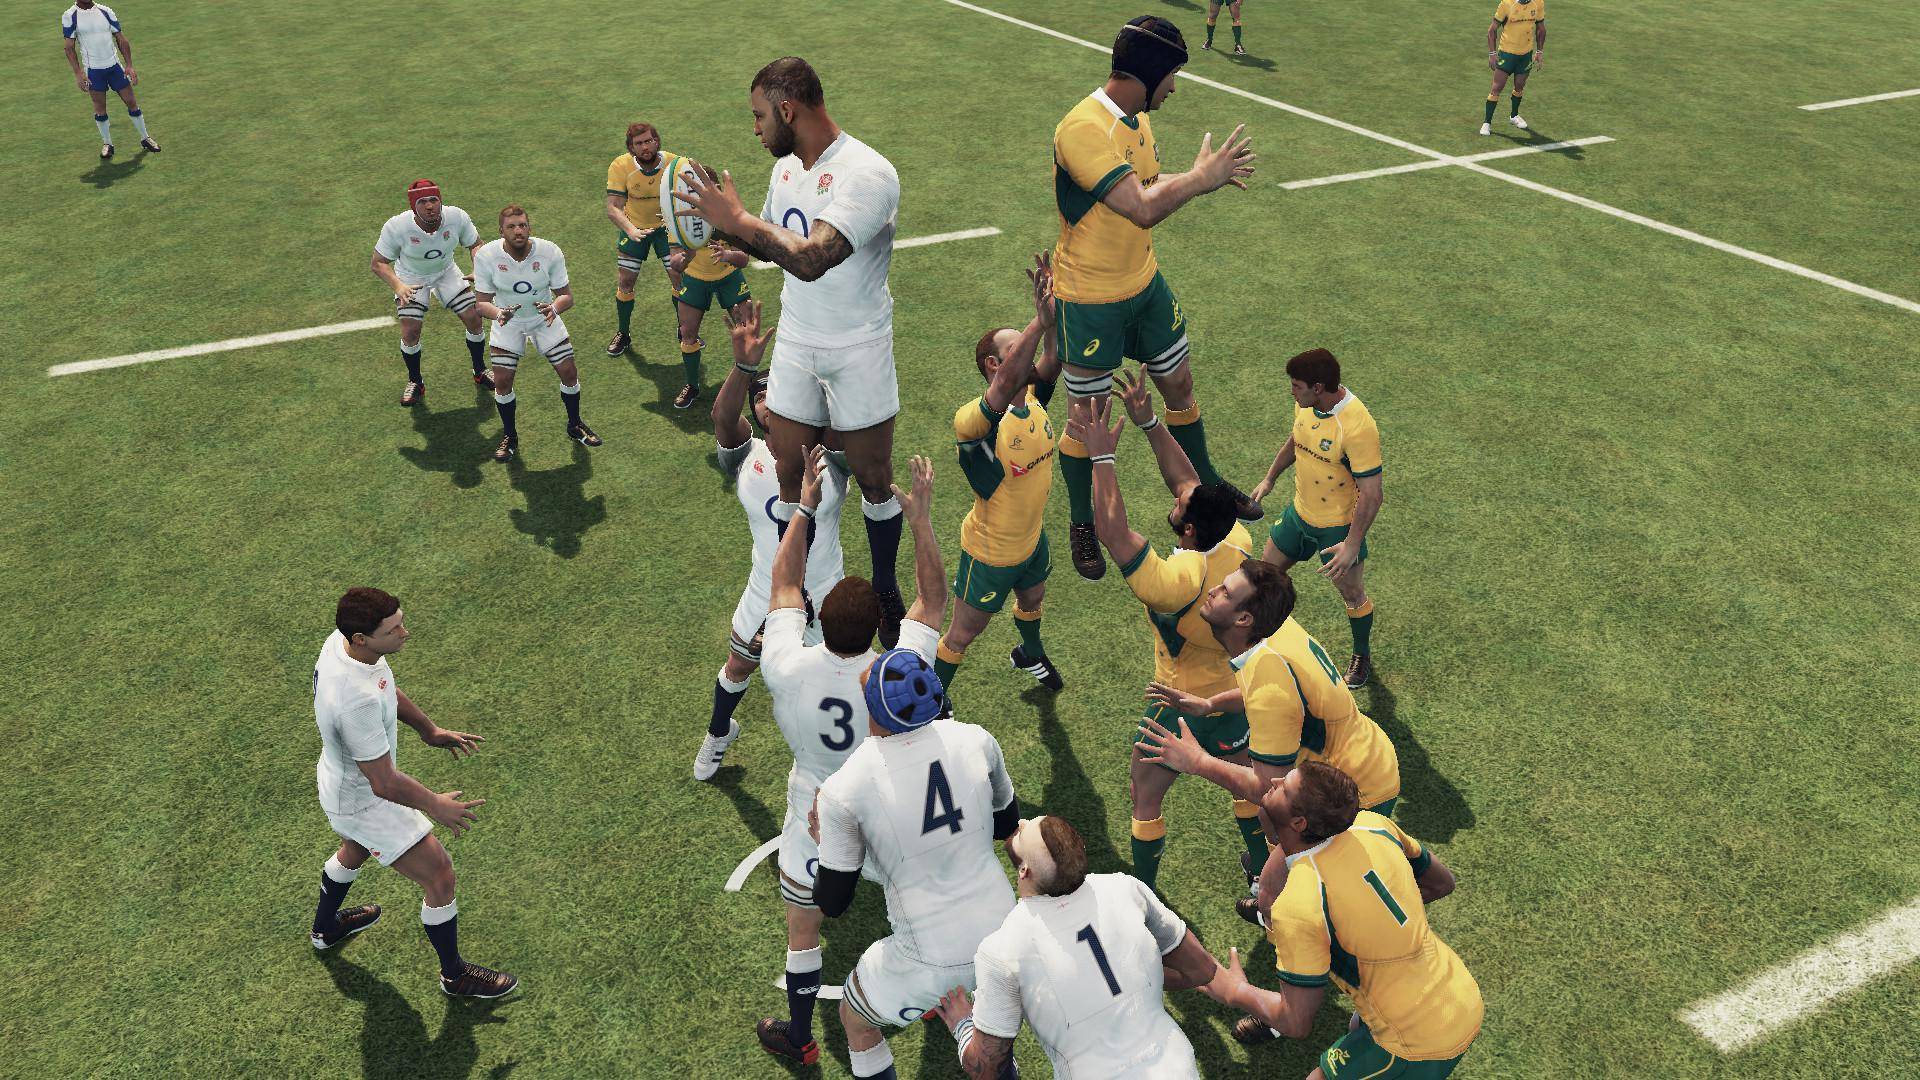 rugby challenge 3 xbox